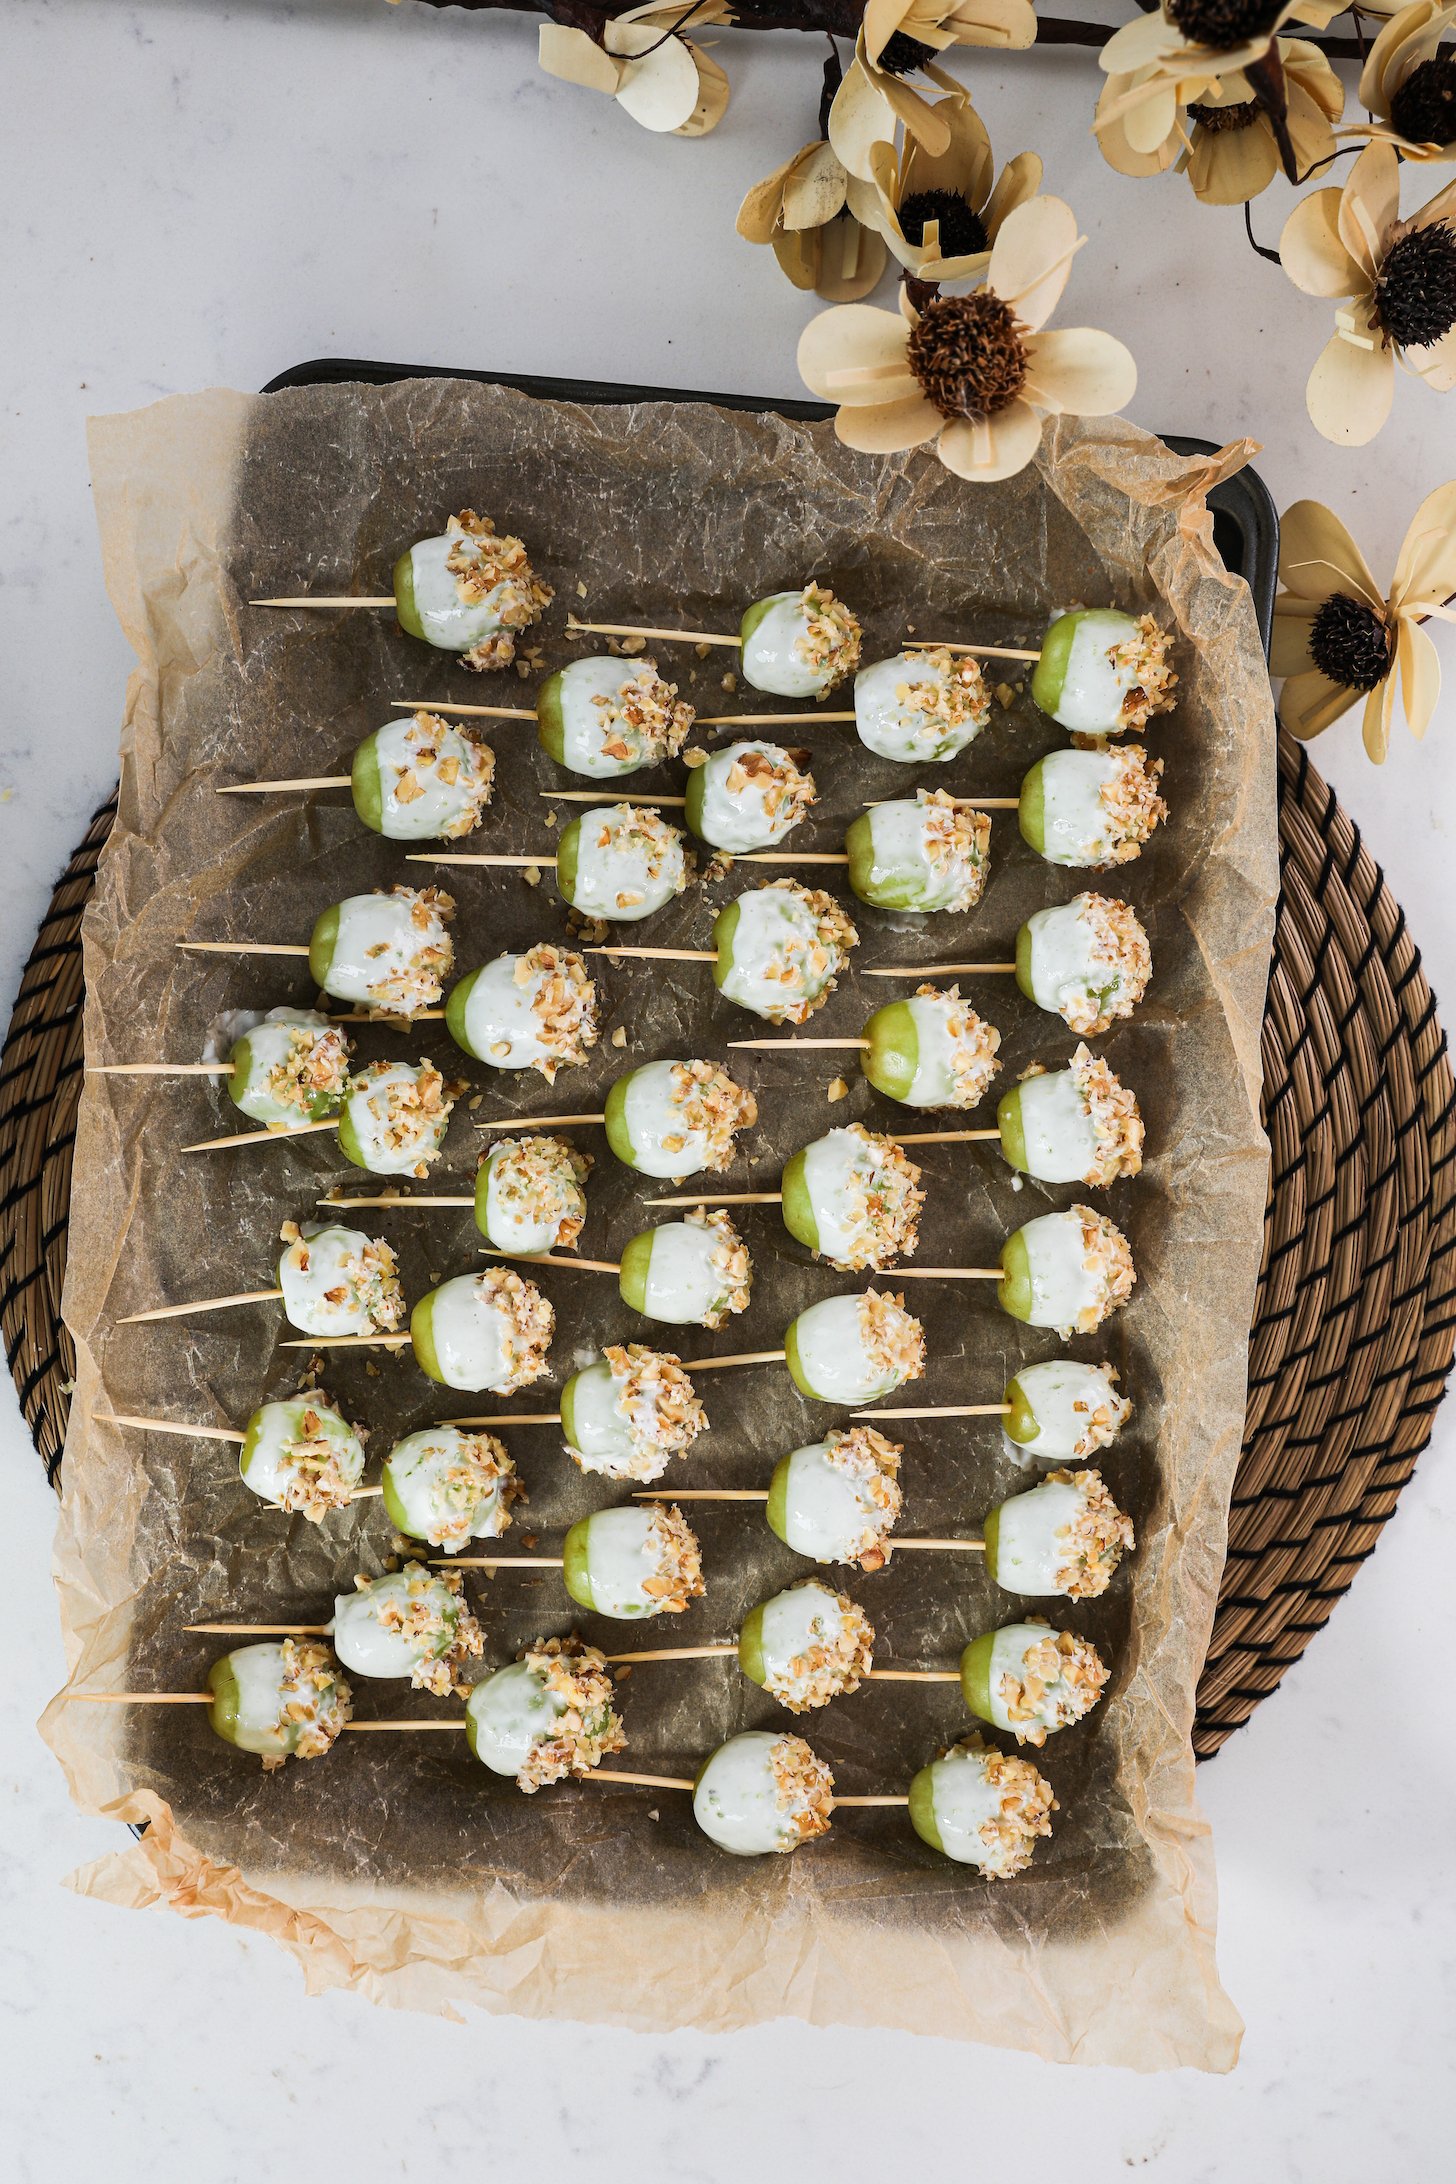 A meticulously arranged baking sheet showcases unfrozen green grapes, each on a wooden pick, elegantly coated in yogurt and sprinkled with crushed nuts.